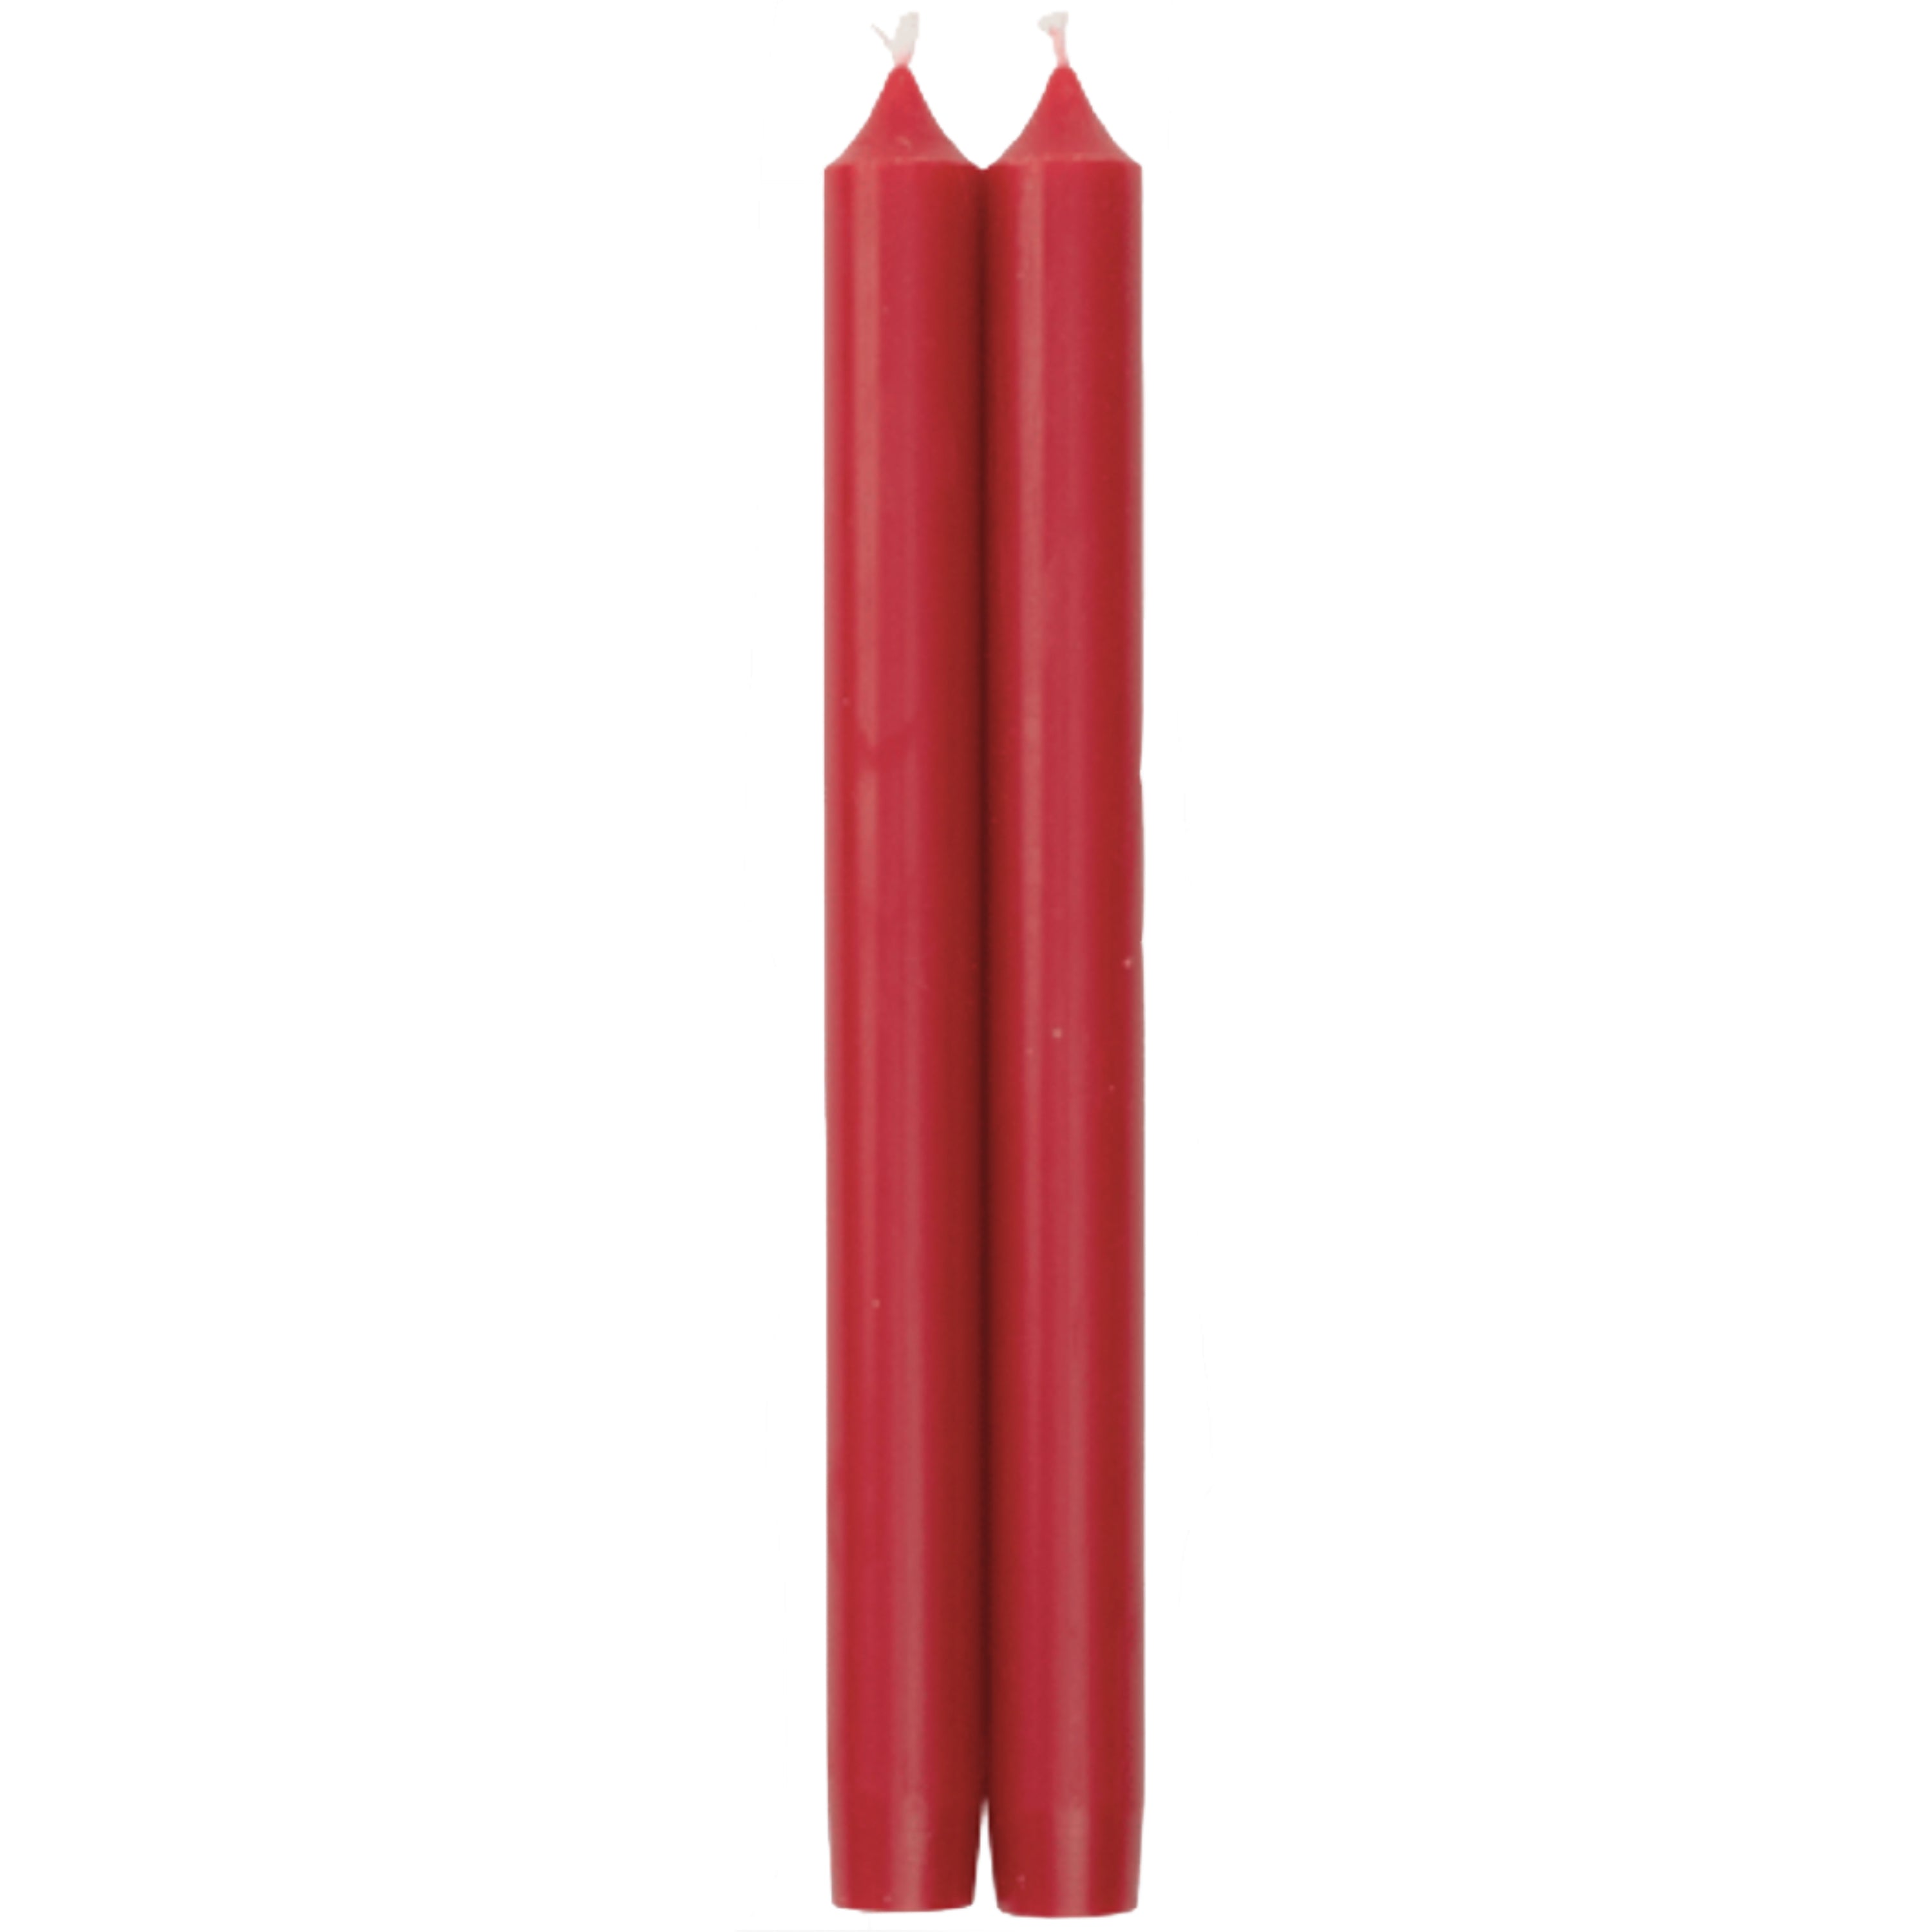 ROOT Candles 9 Unscented Timberline Collenette Taper Candles 4ct